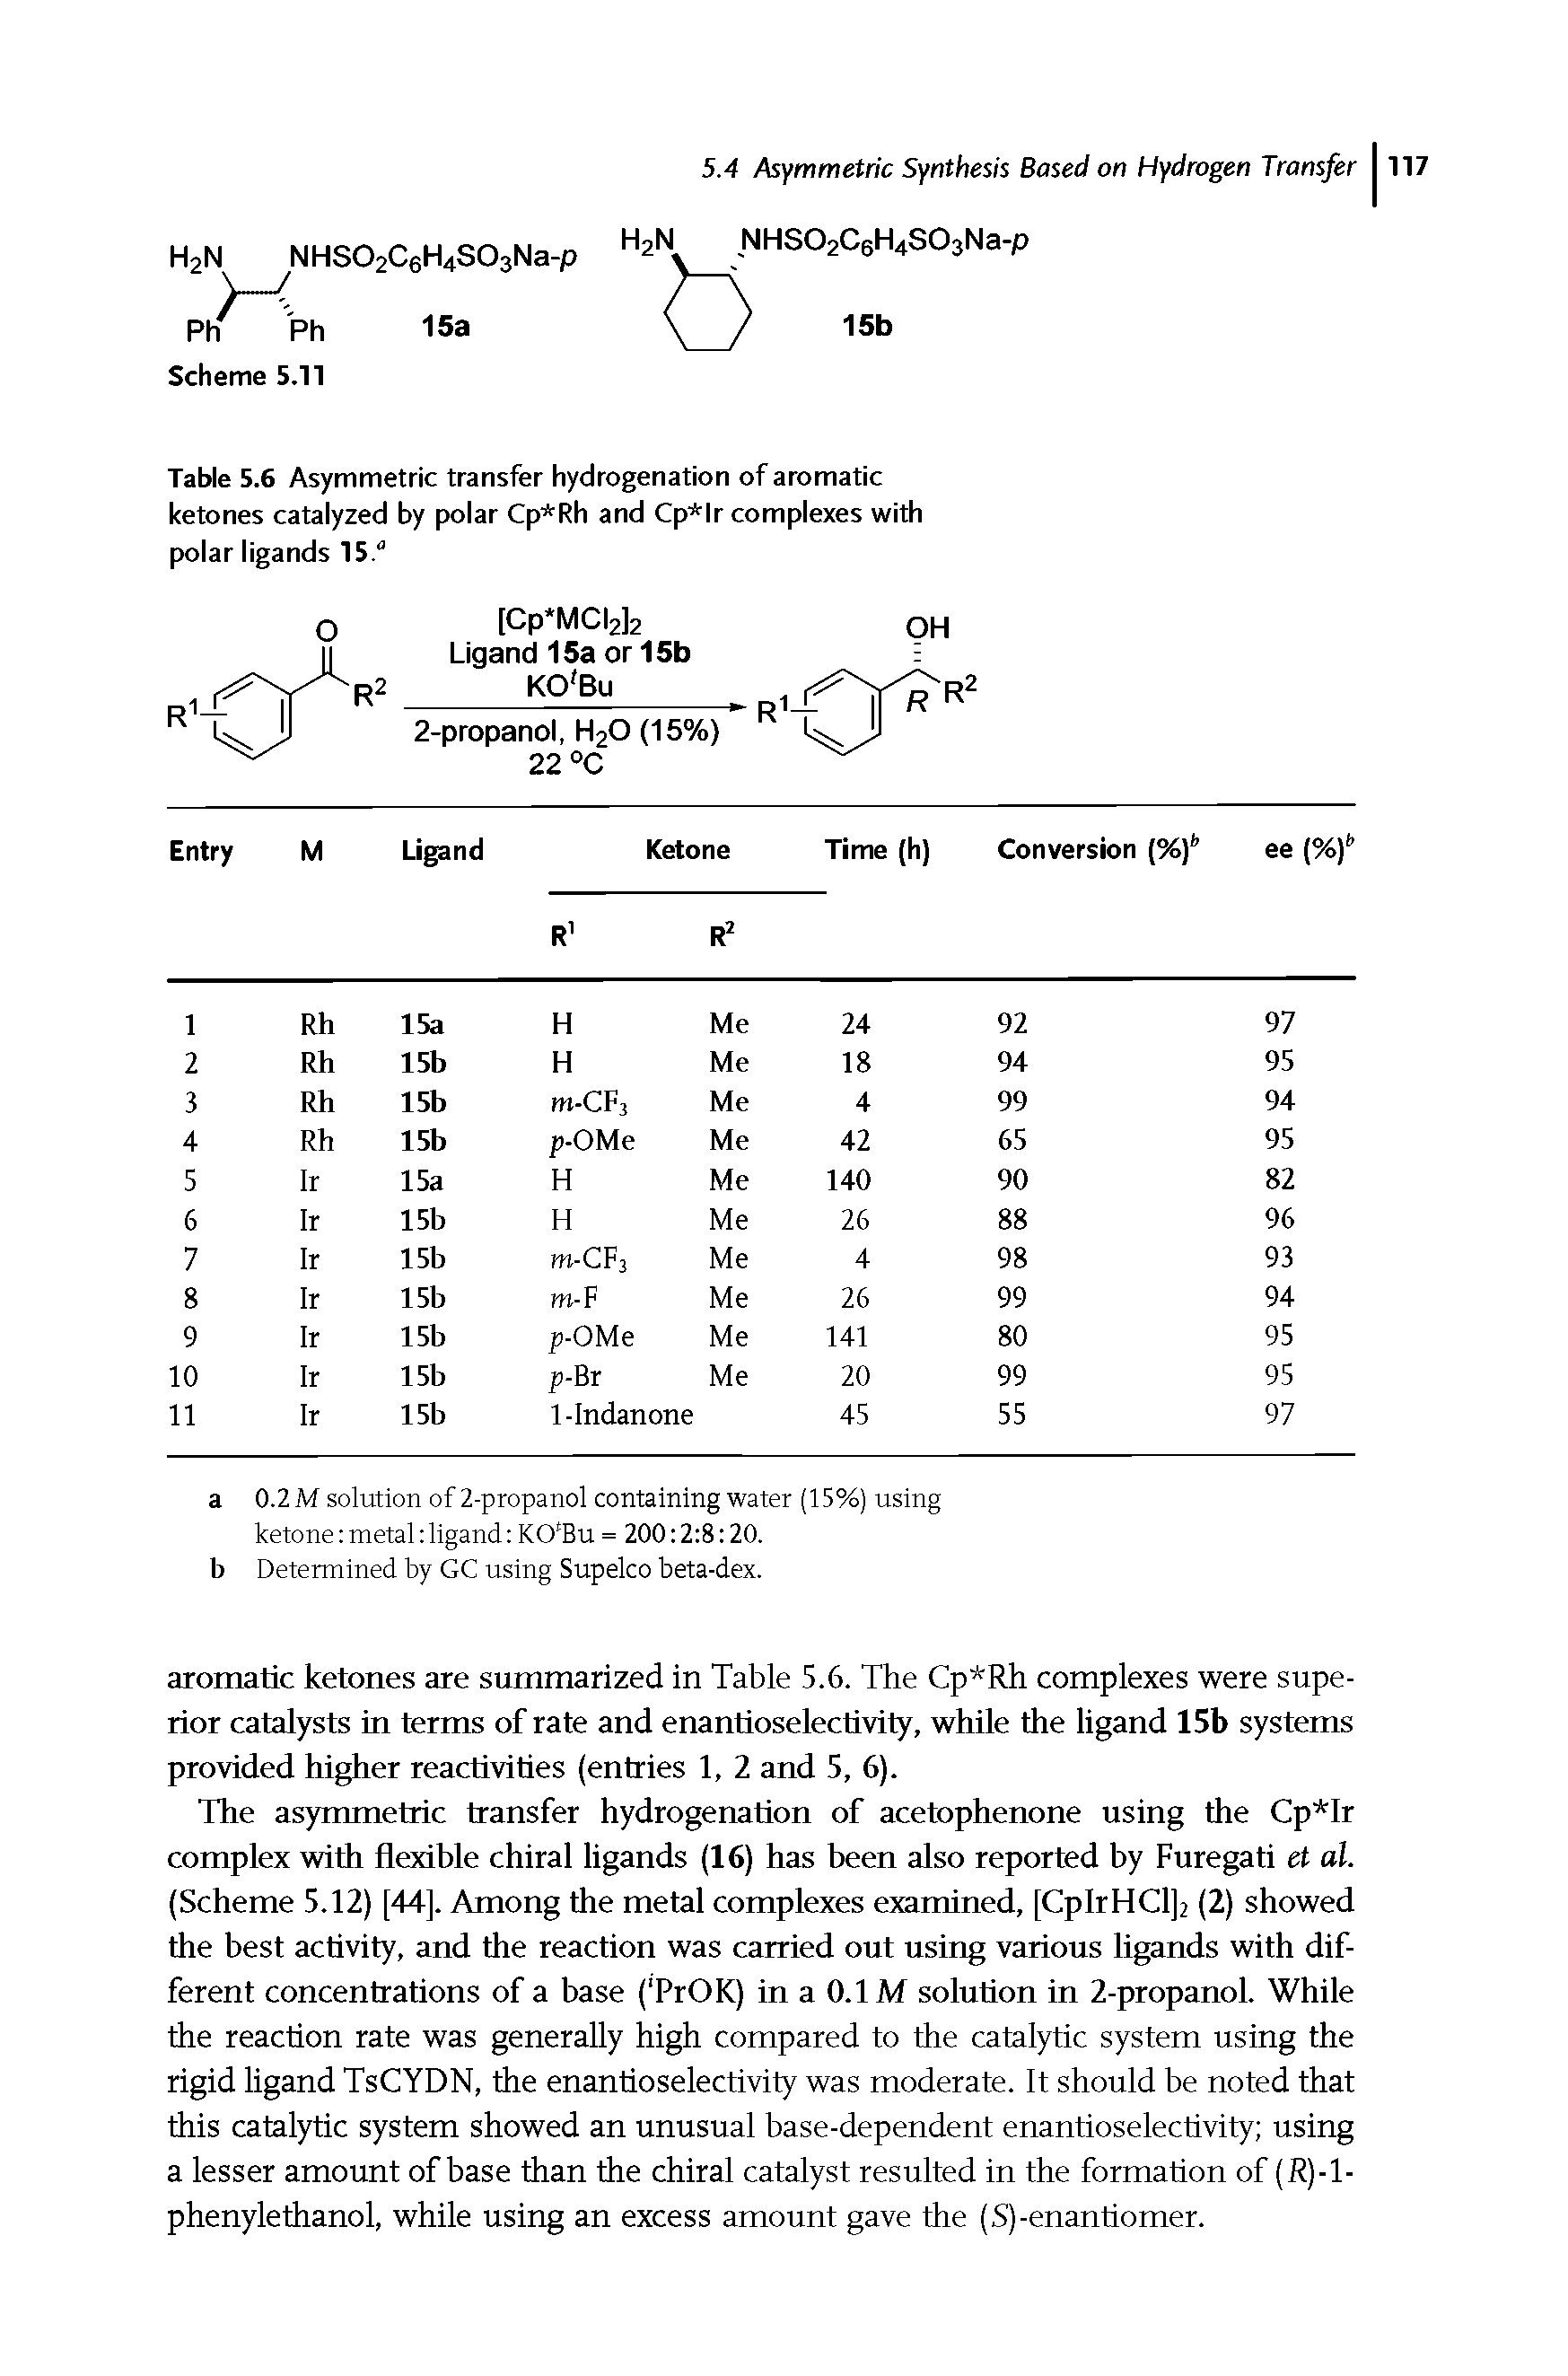 Table 5.6 Asymmetric transfer hydrogenation of aromatic ketones catalyzed by polar Cp Rh and Cp lr complexes with polar ligands 15."...